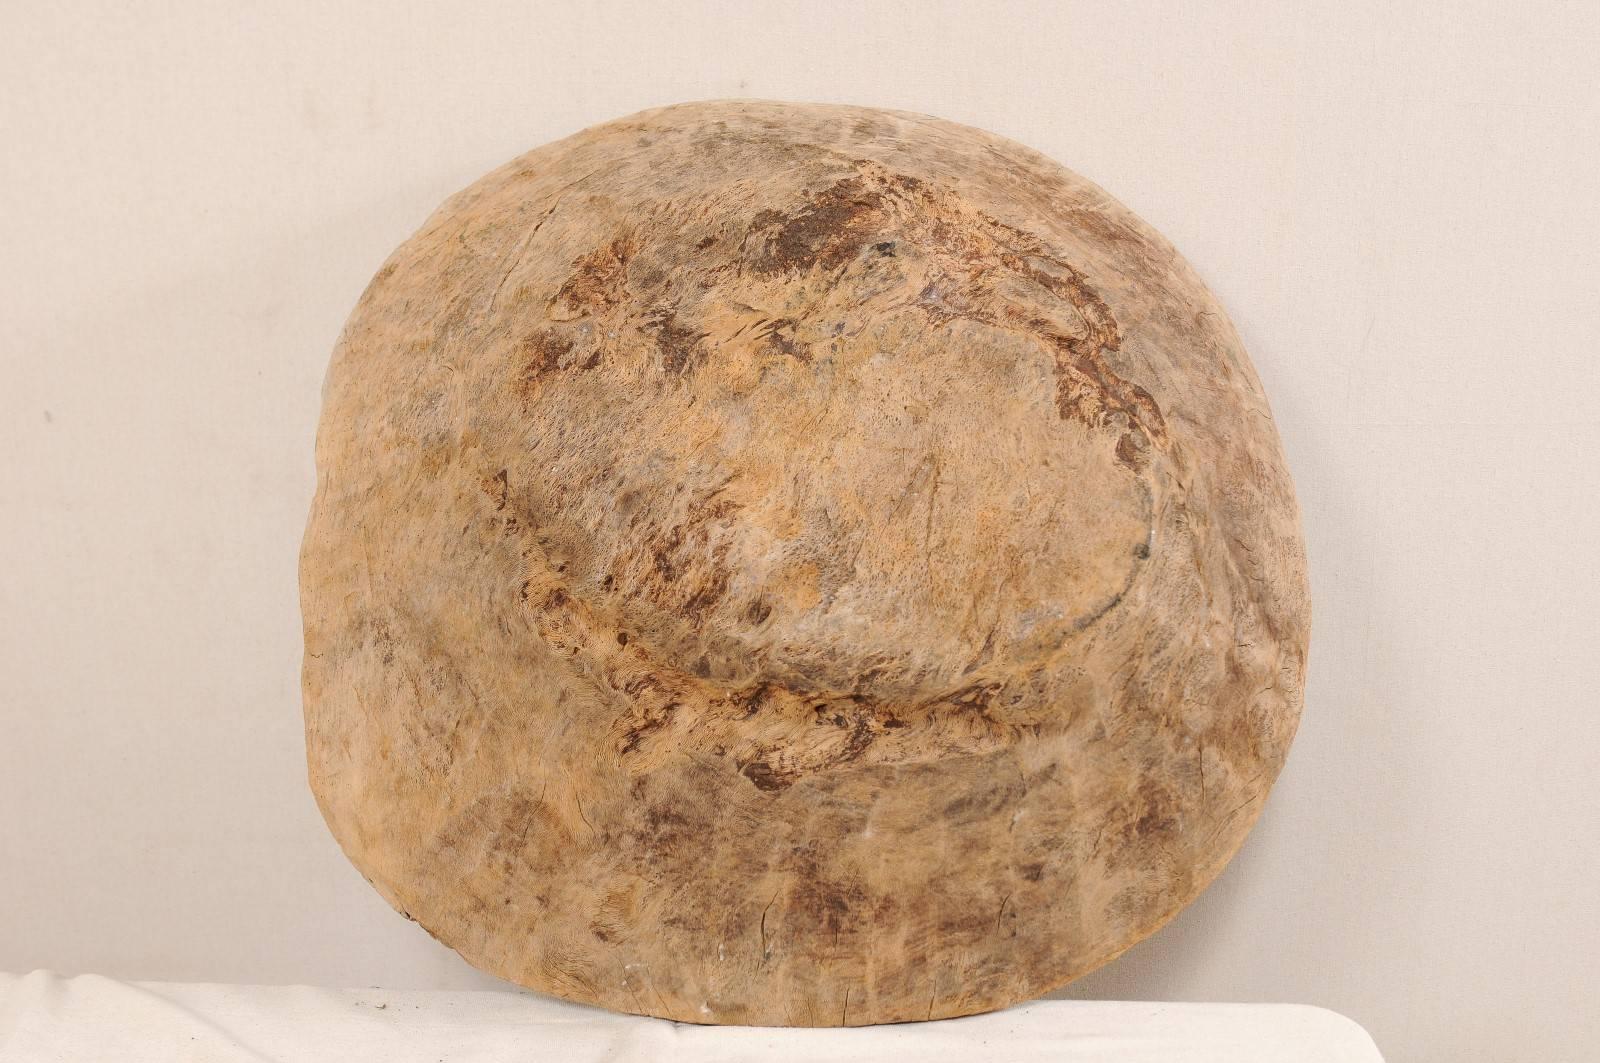 Oversized European Rustic Antique Hand-Carved Burl Wood Bowl with Round Shape 3